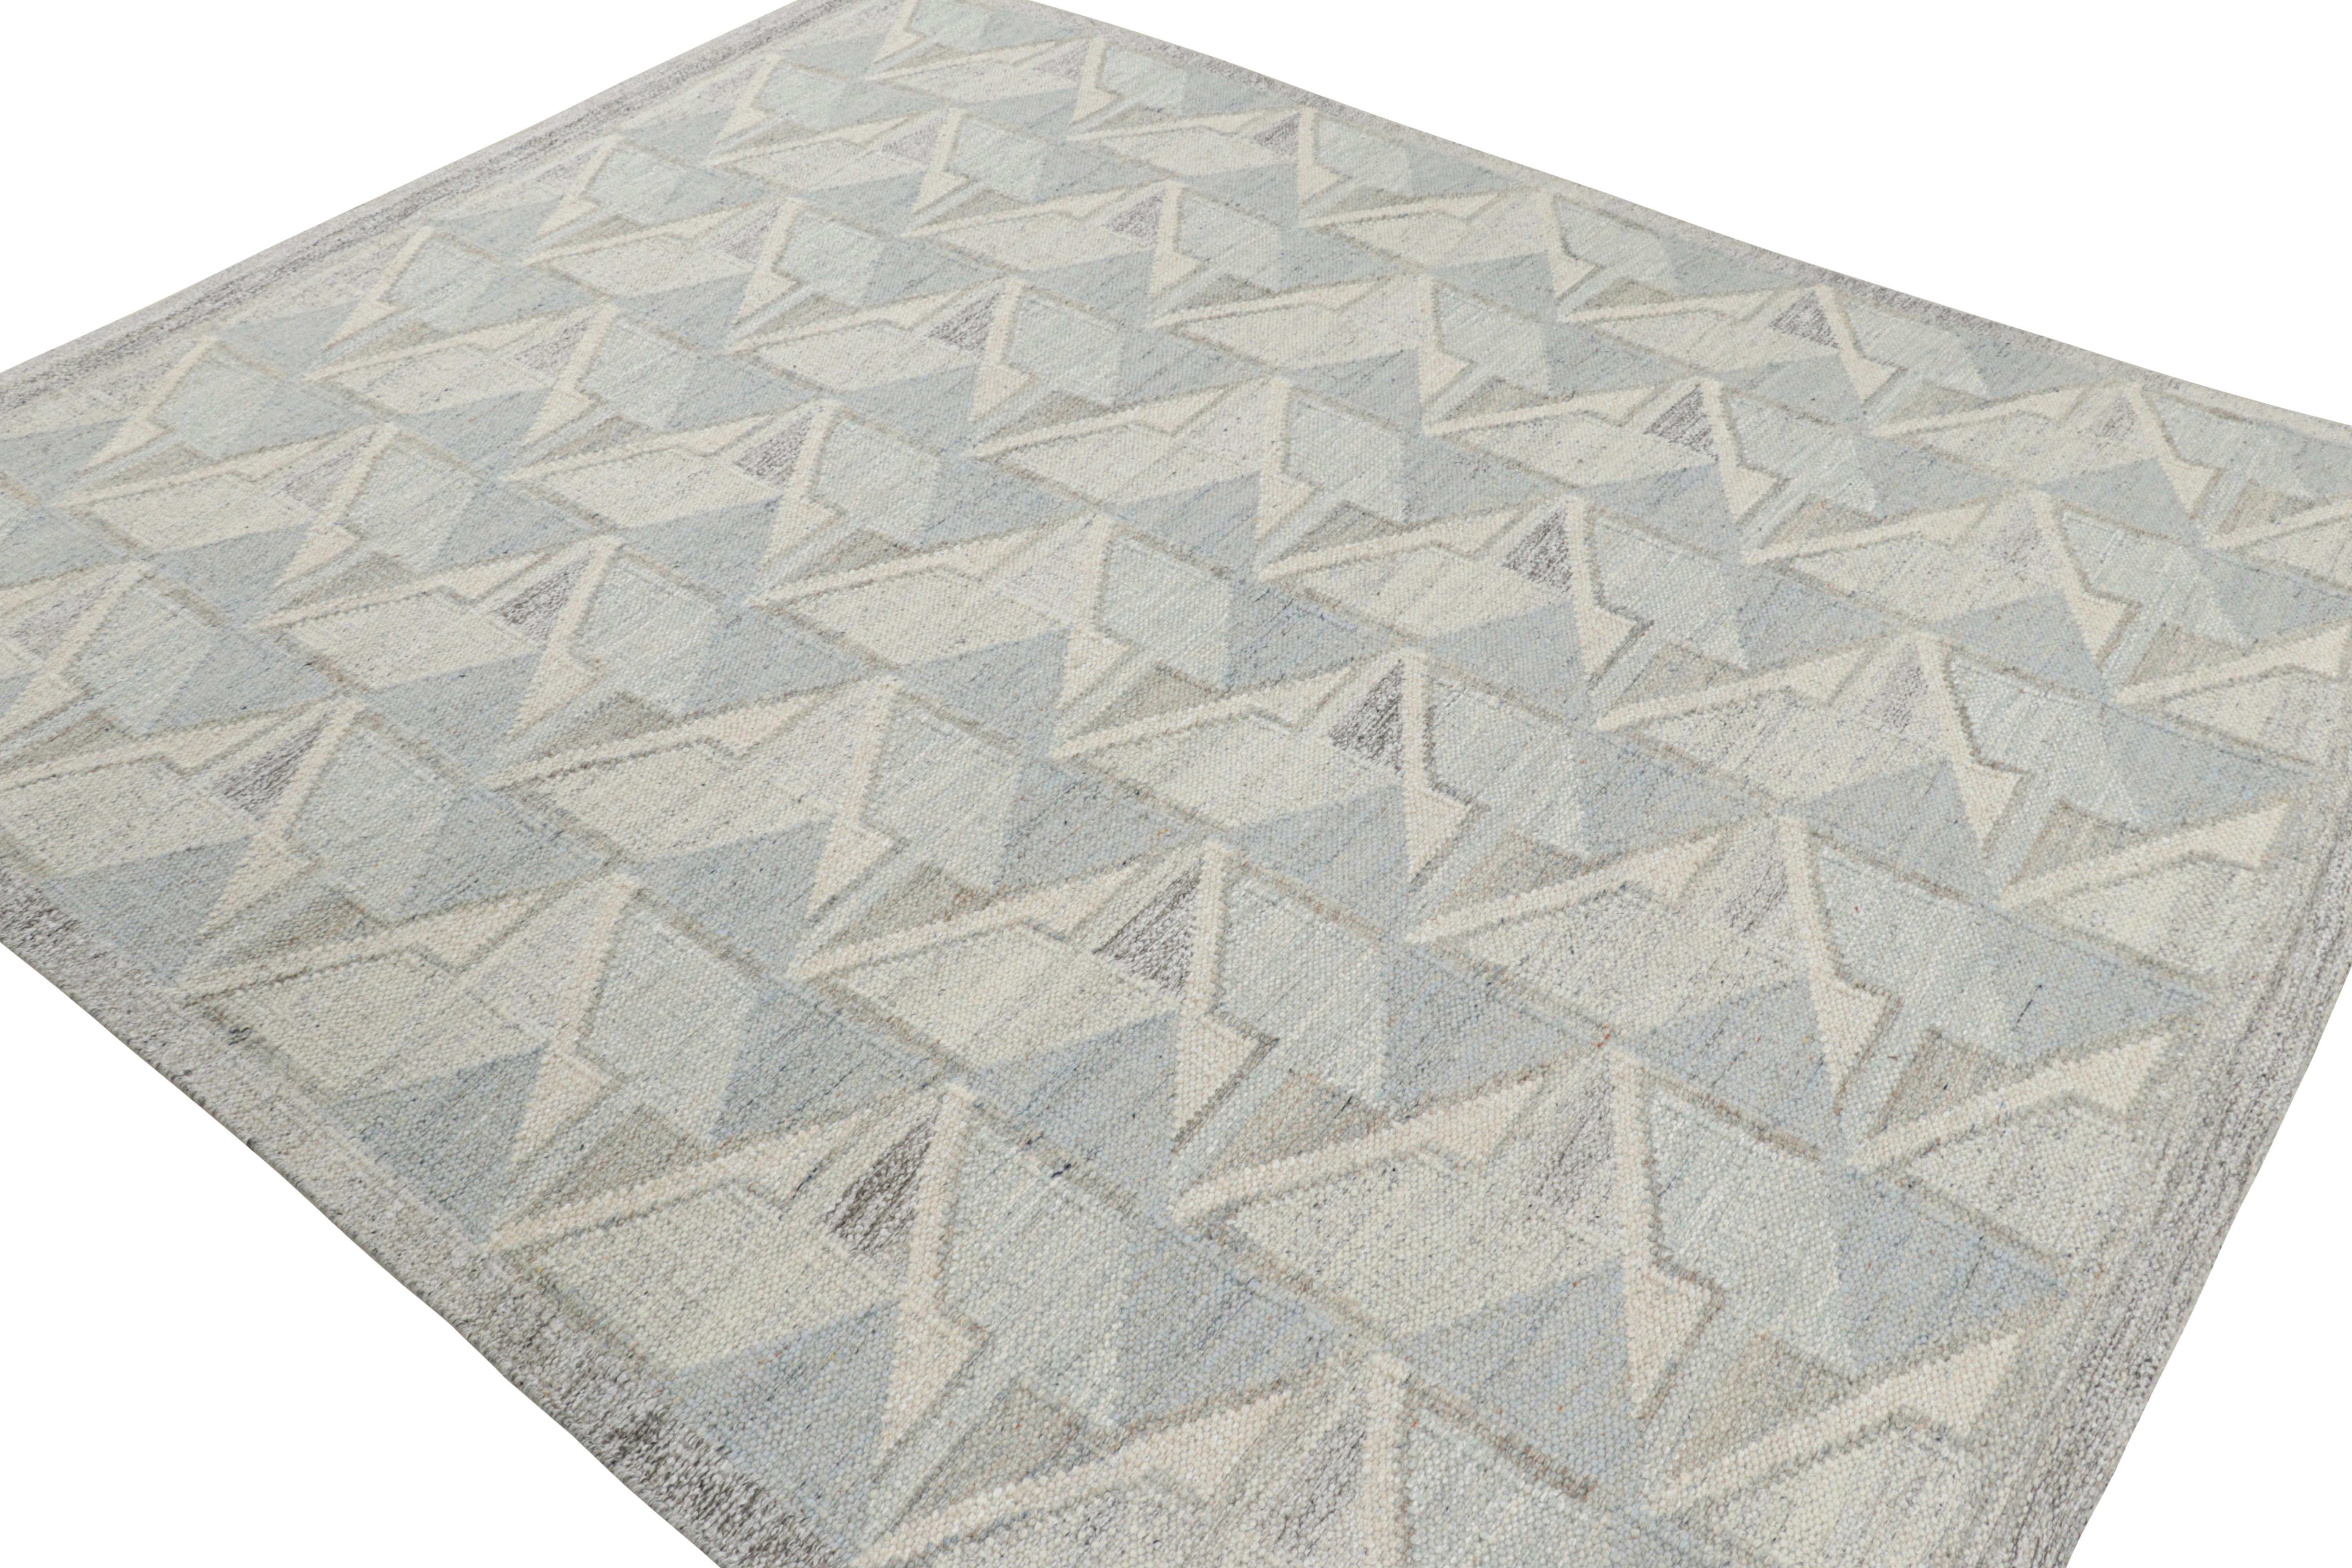 Indian Rug & Kilim’s Scandinavian Style Rug in Blue with Gray-White Geometric Patterns For Sale